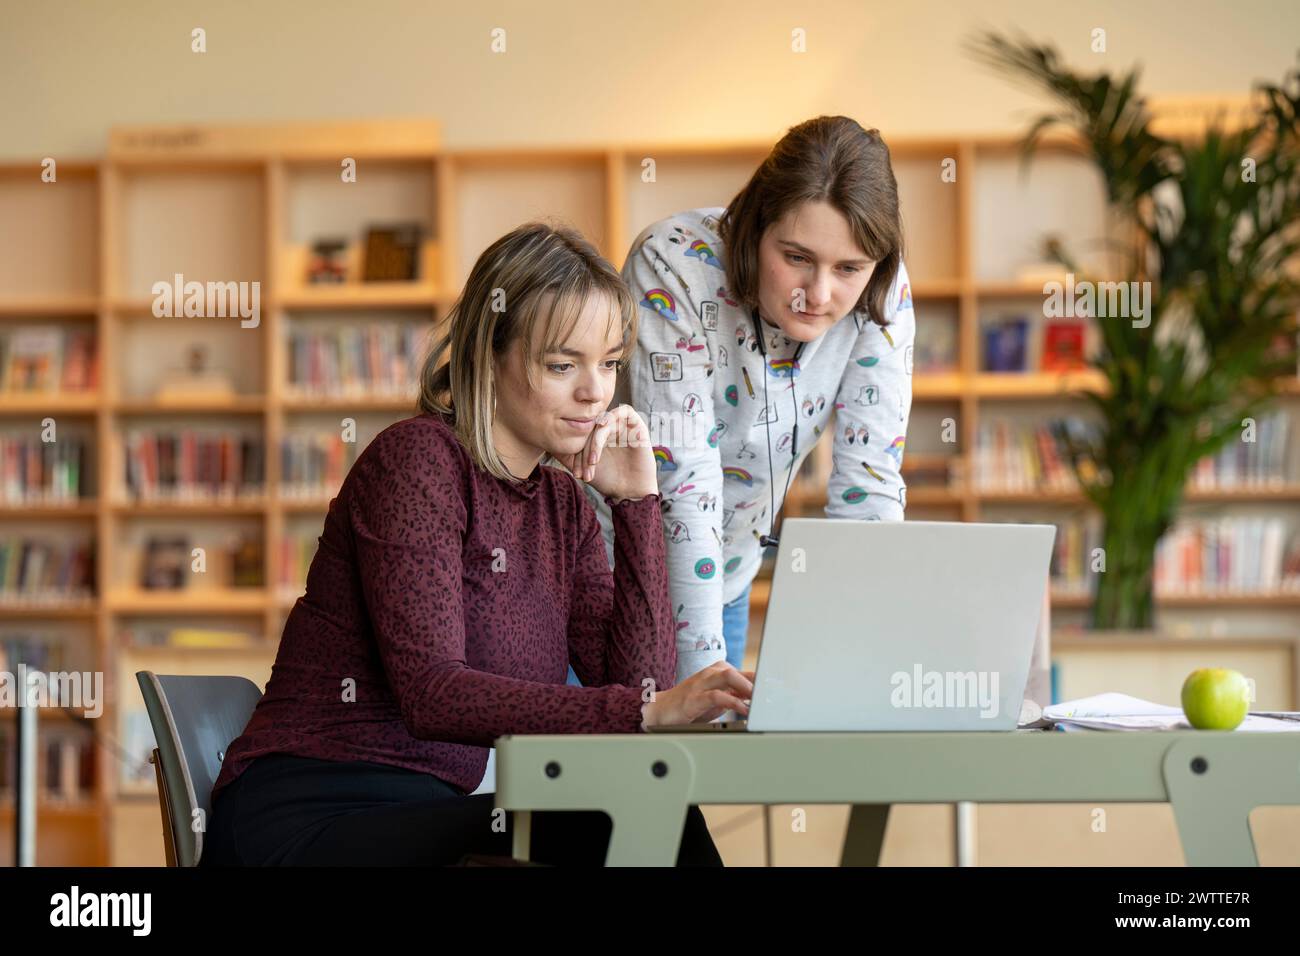 Two individuals collaborating over a laptop in a library setting. Stock Photo